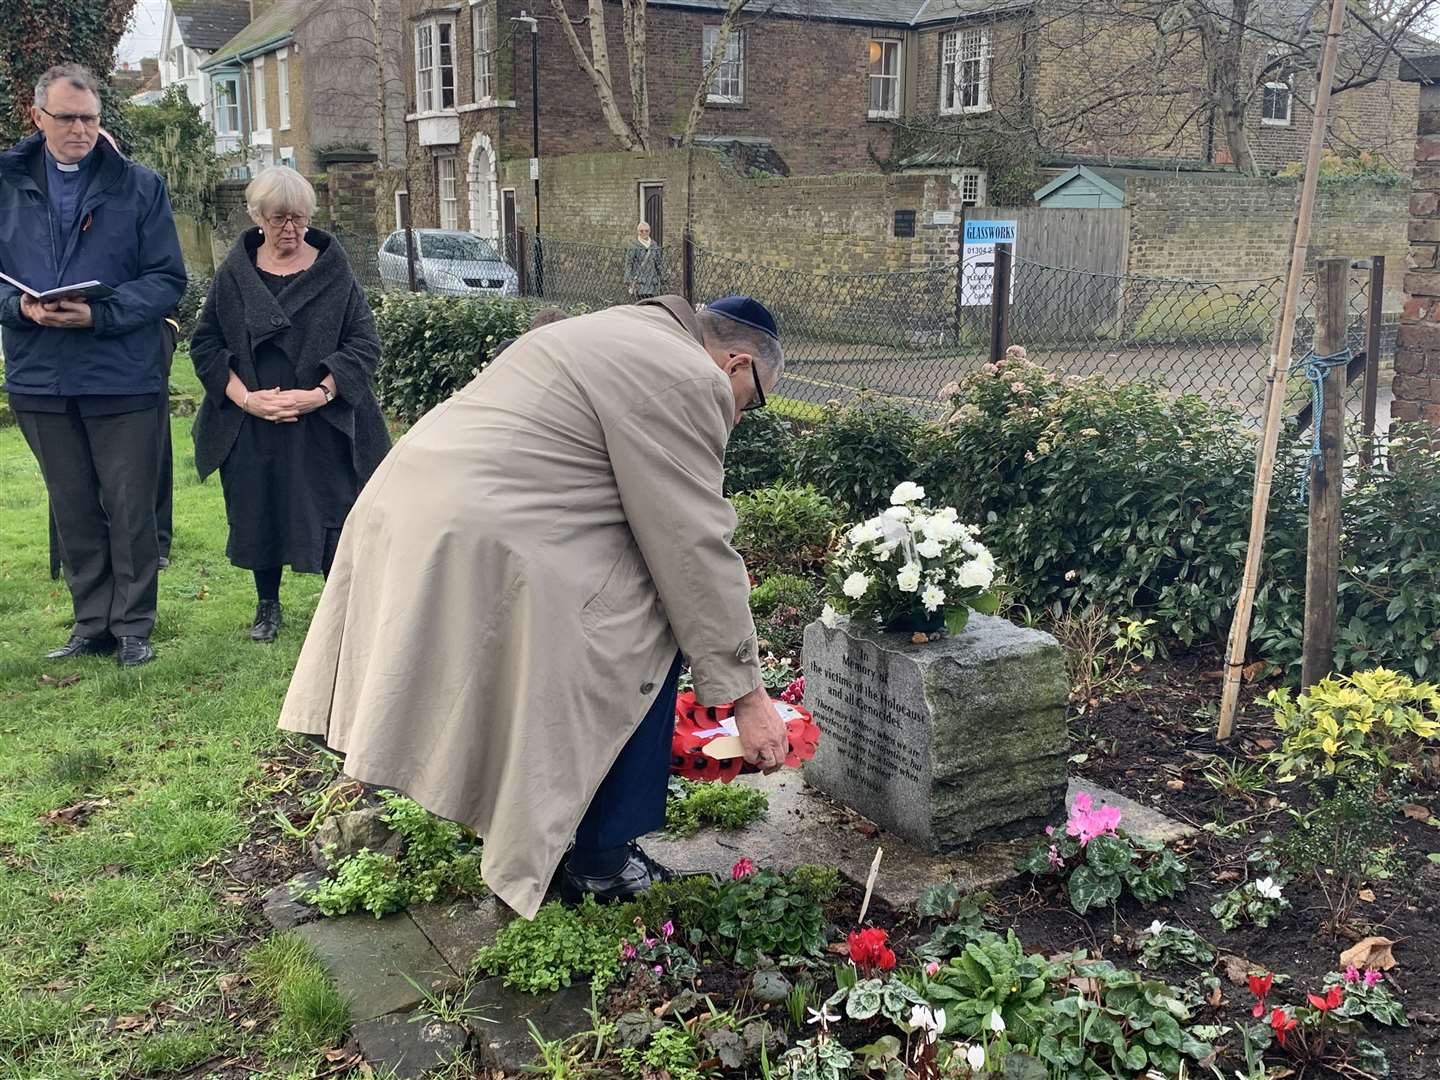 Former councillor Nick Tomaszewski placed a wreath at the stone